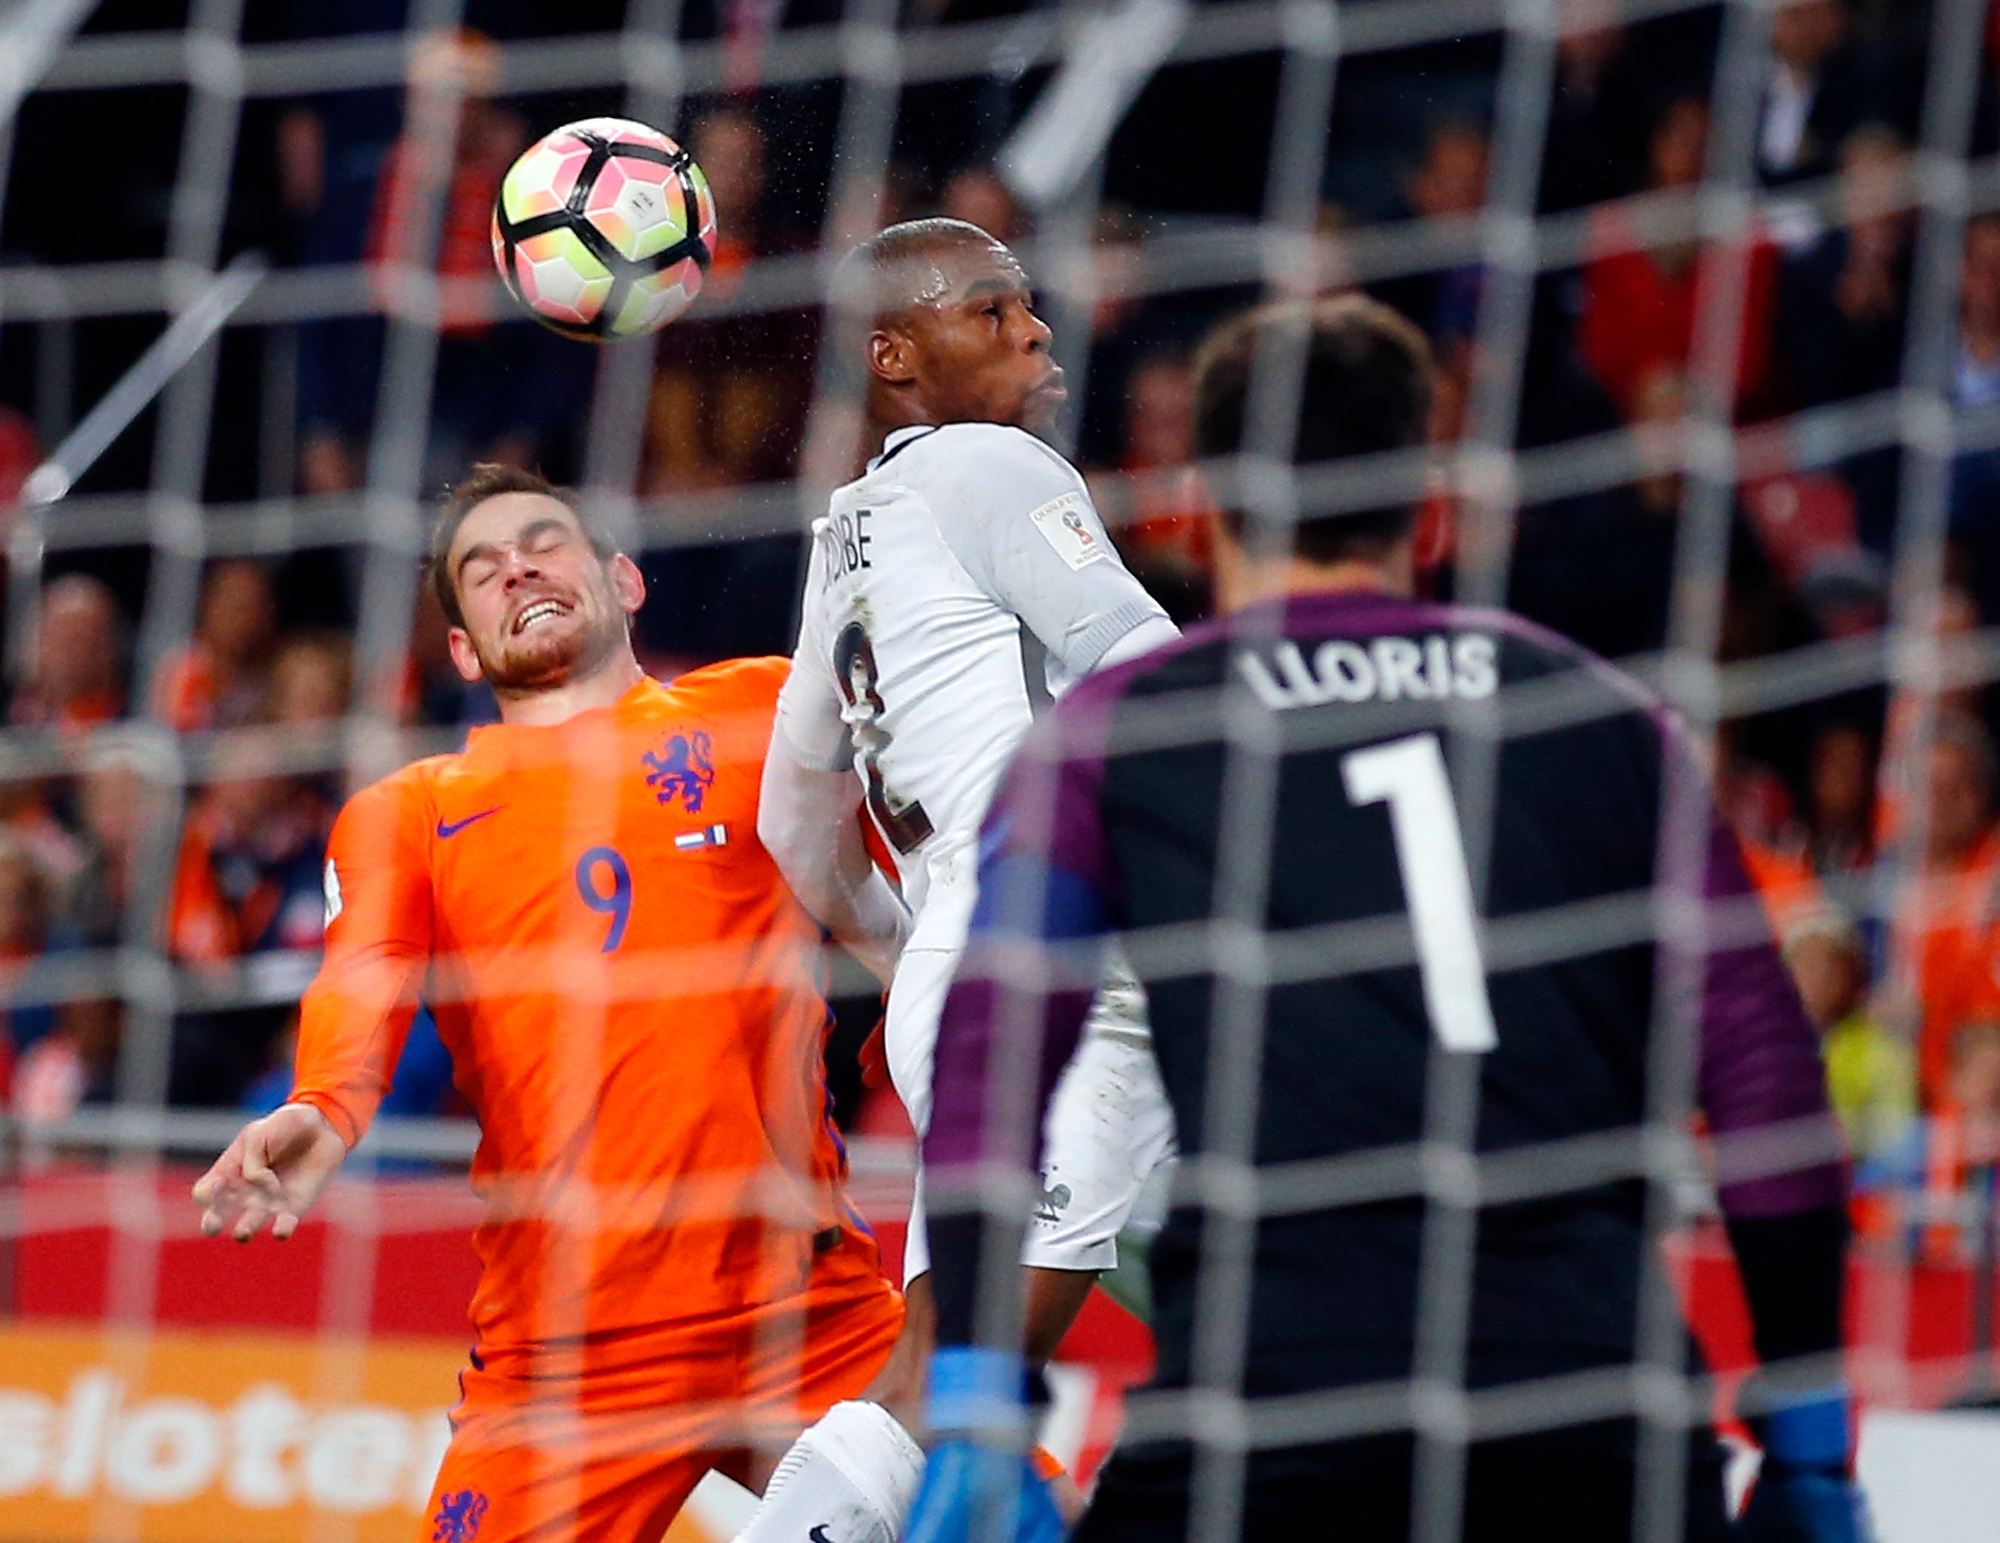 Netherlands' Vincent Janssen, left, heads the ball with France's Djibril Sidibe, center, while France's goalkeeper Hugo Lloris looks on  during the World Cup Group A qualifying soccer match in the ArenA stadium in Amsterdam, Netherlands, Monday, Oct. 10, 2016. France defeated Netherlands 1-0. (AP Photo/Peter Dejong)bv SOCCER WCUP 2018 NETHERLANDS FRANCE